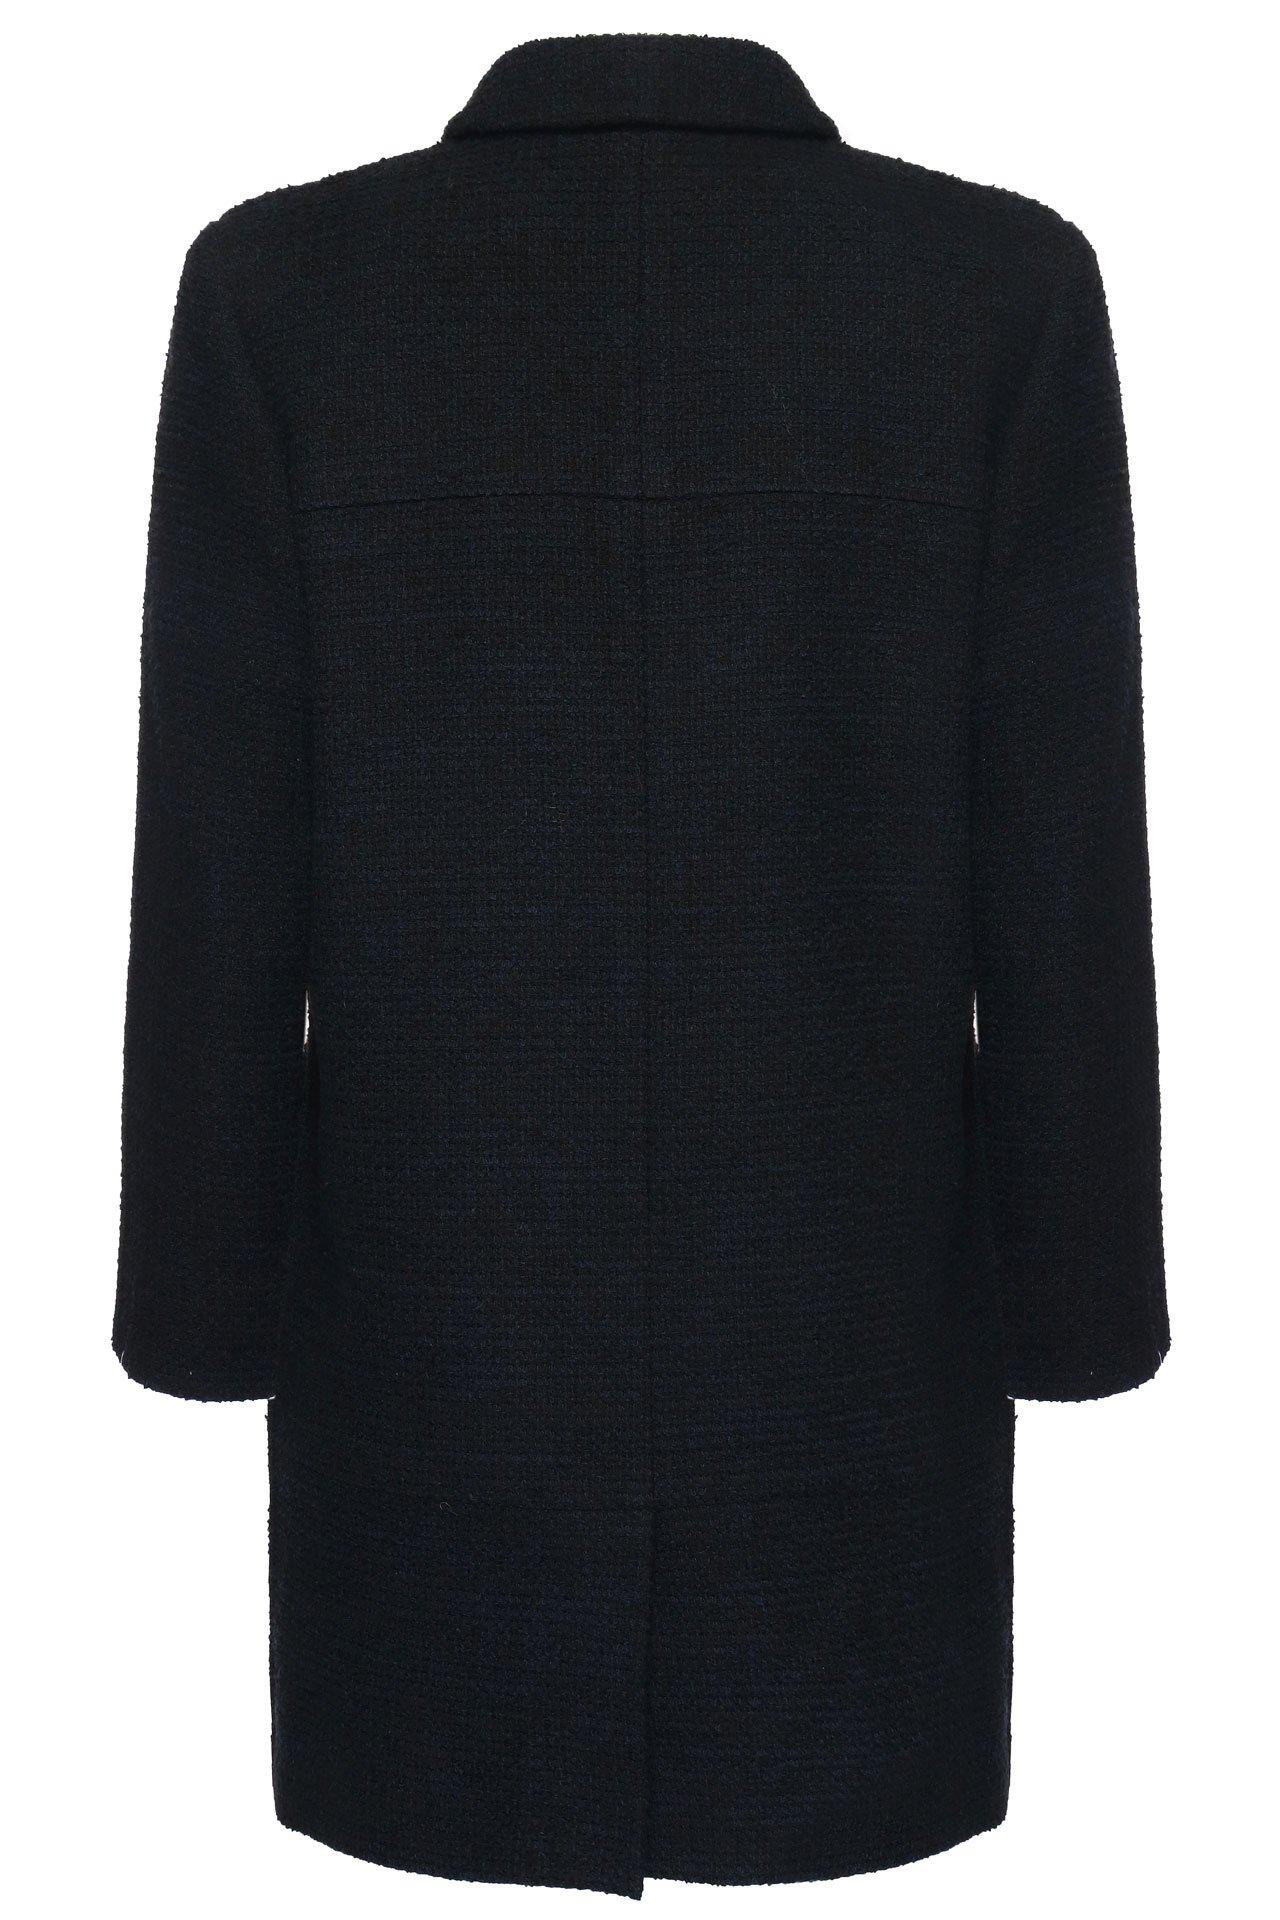 Chanel New CC Buttons RelaxedTweed Jacket For Sale 2